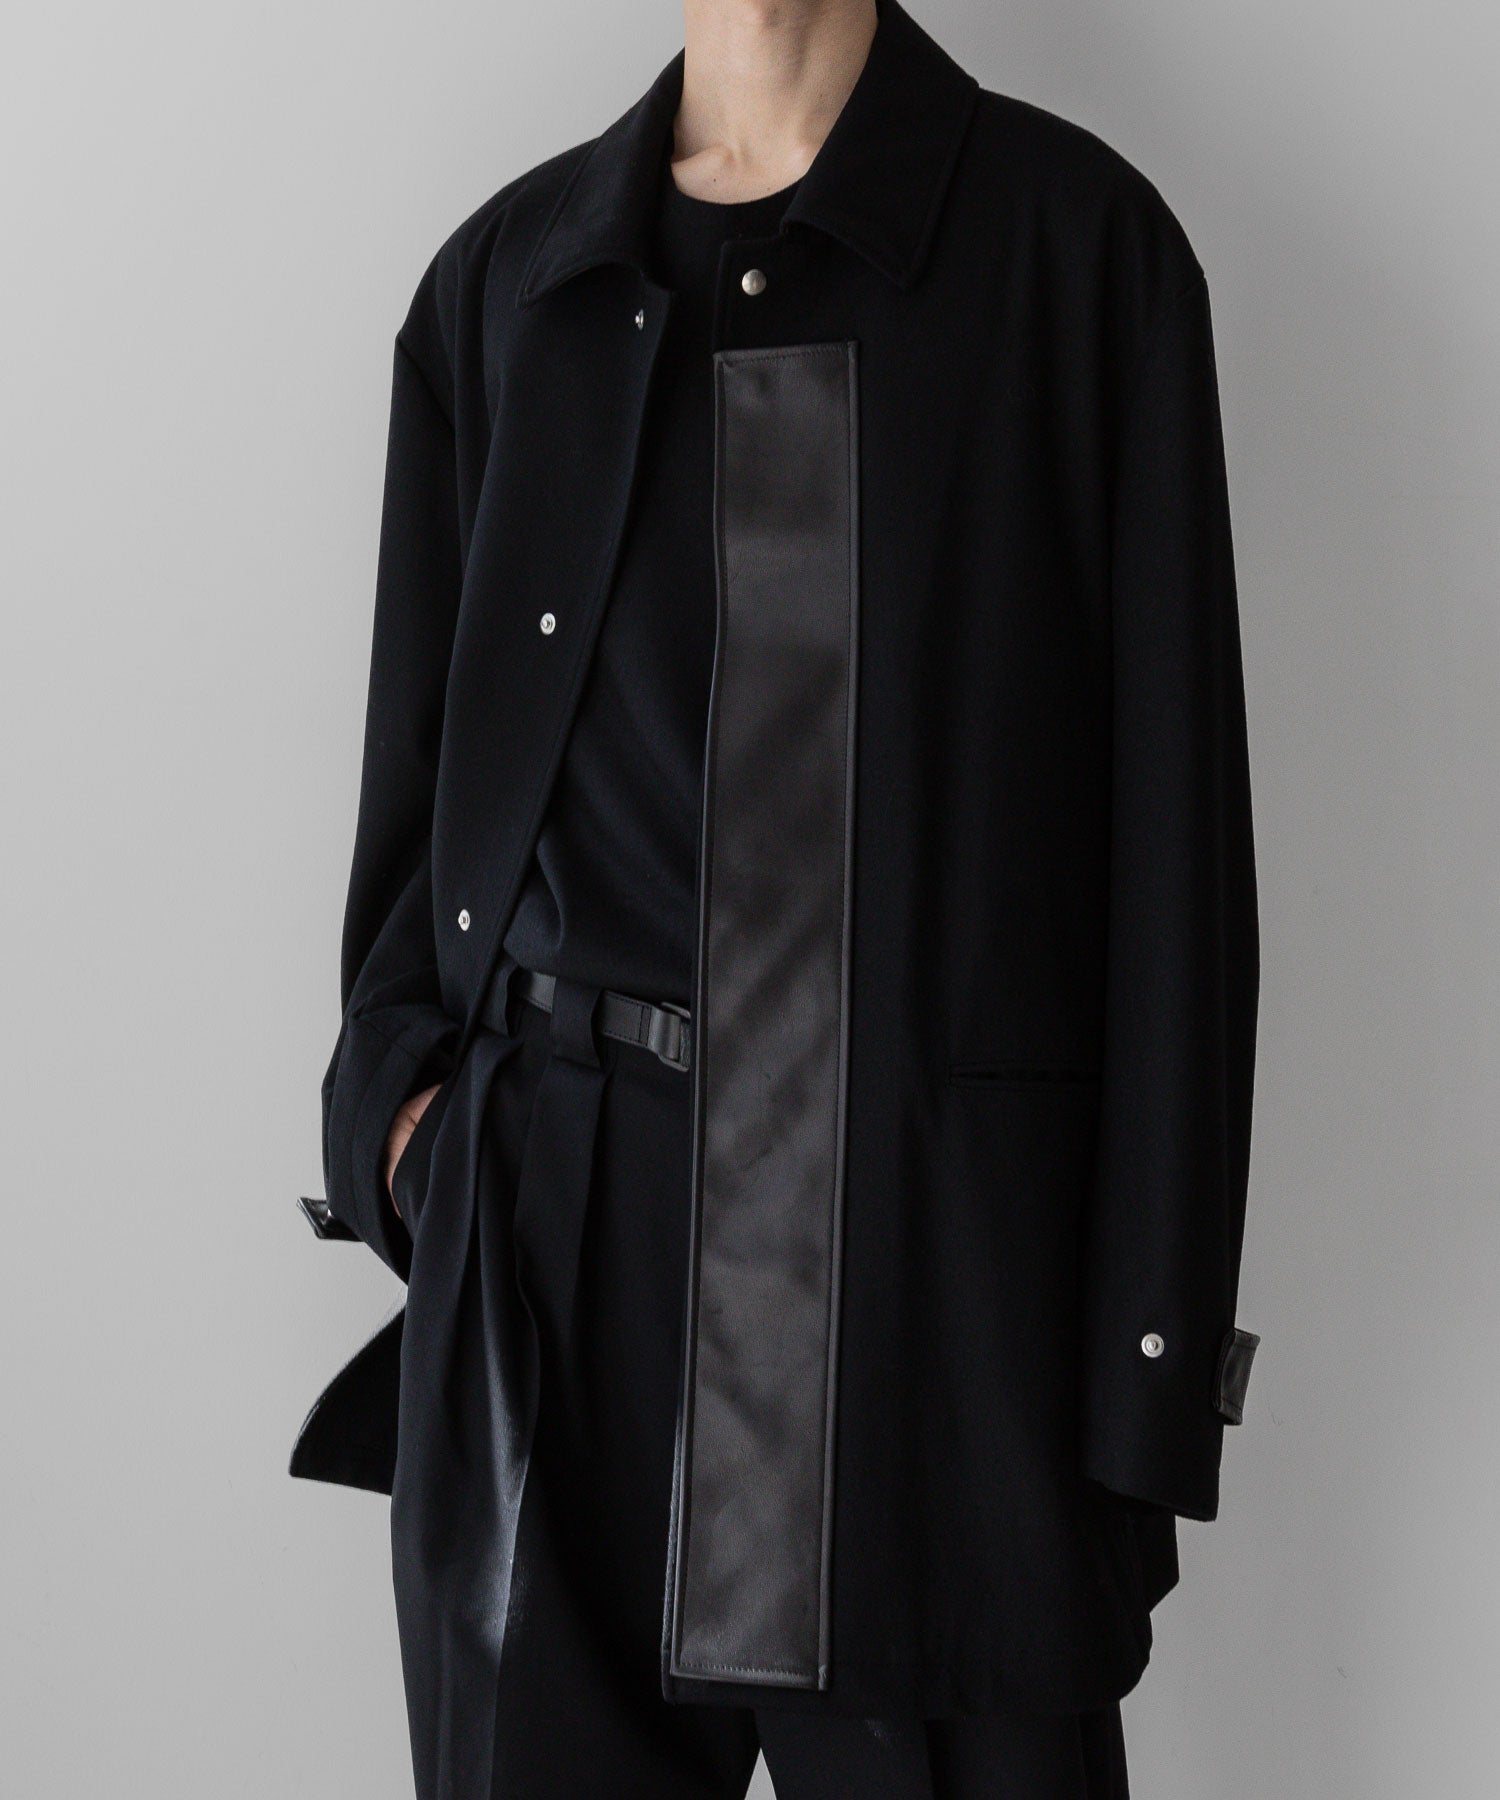 【stein】LEATHER FLY FRONT LONG JACKET - BLACK